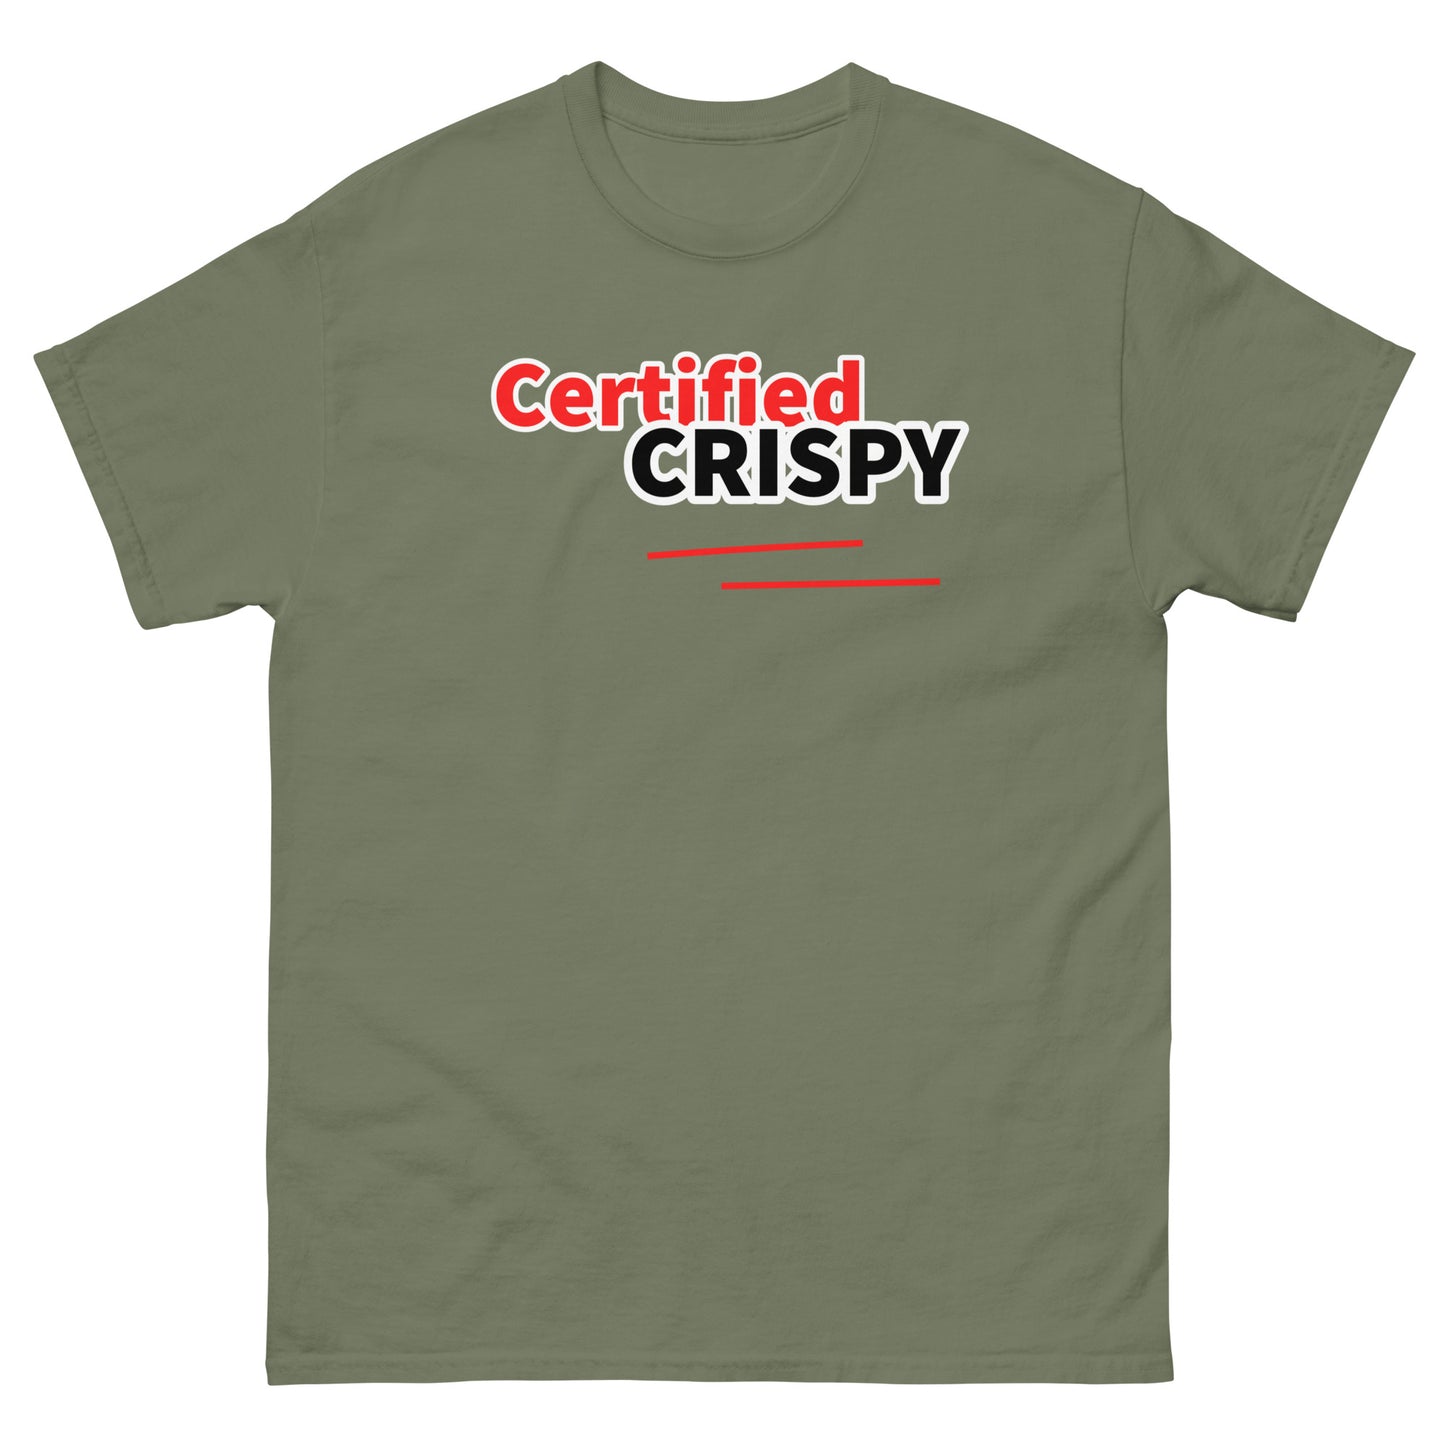 'Certified Crispy': The Indie Music Hunt Signature T-Shirt